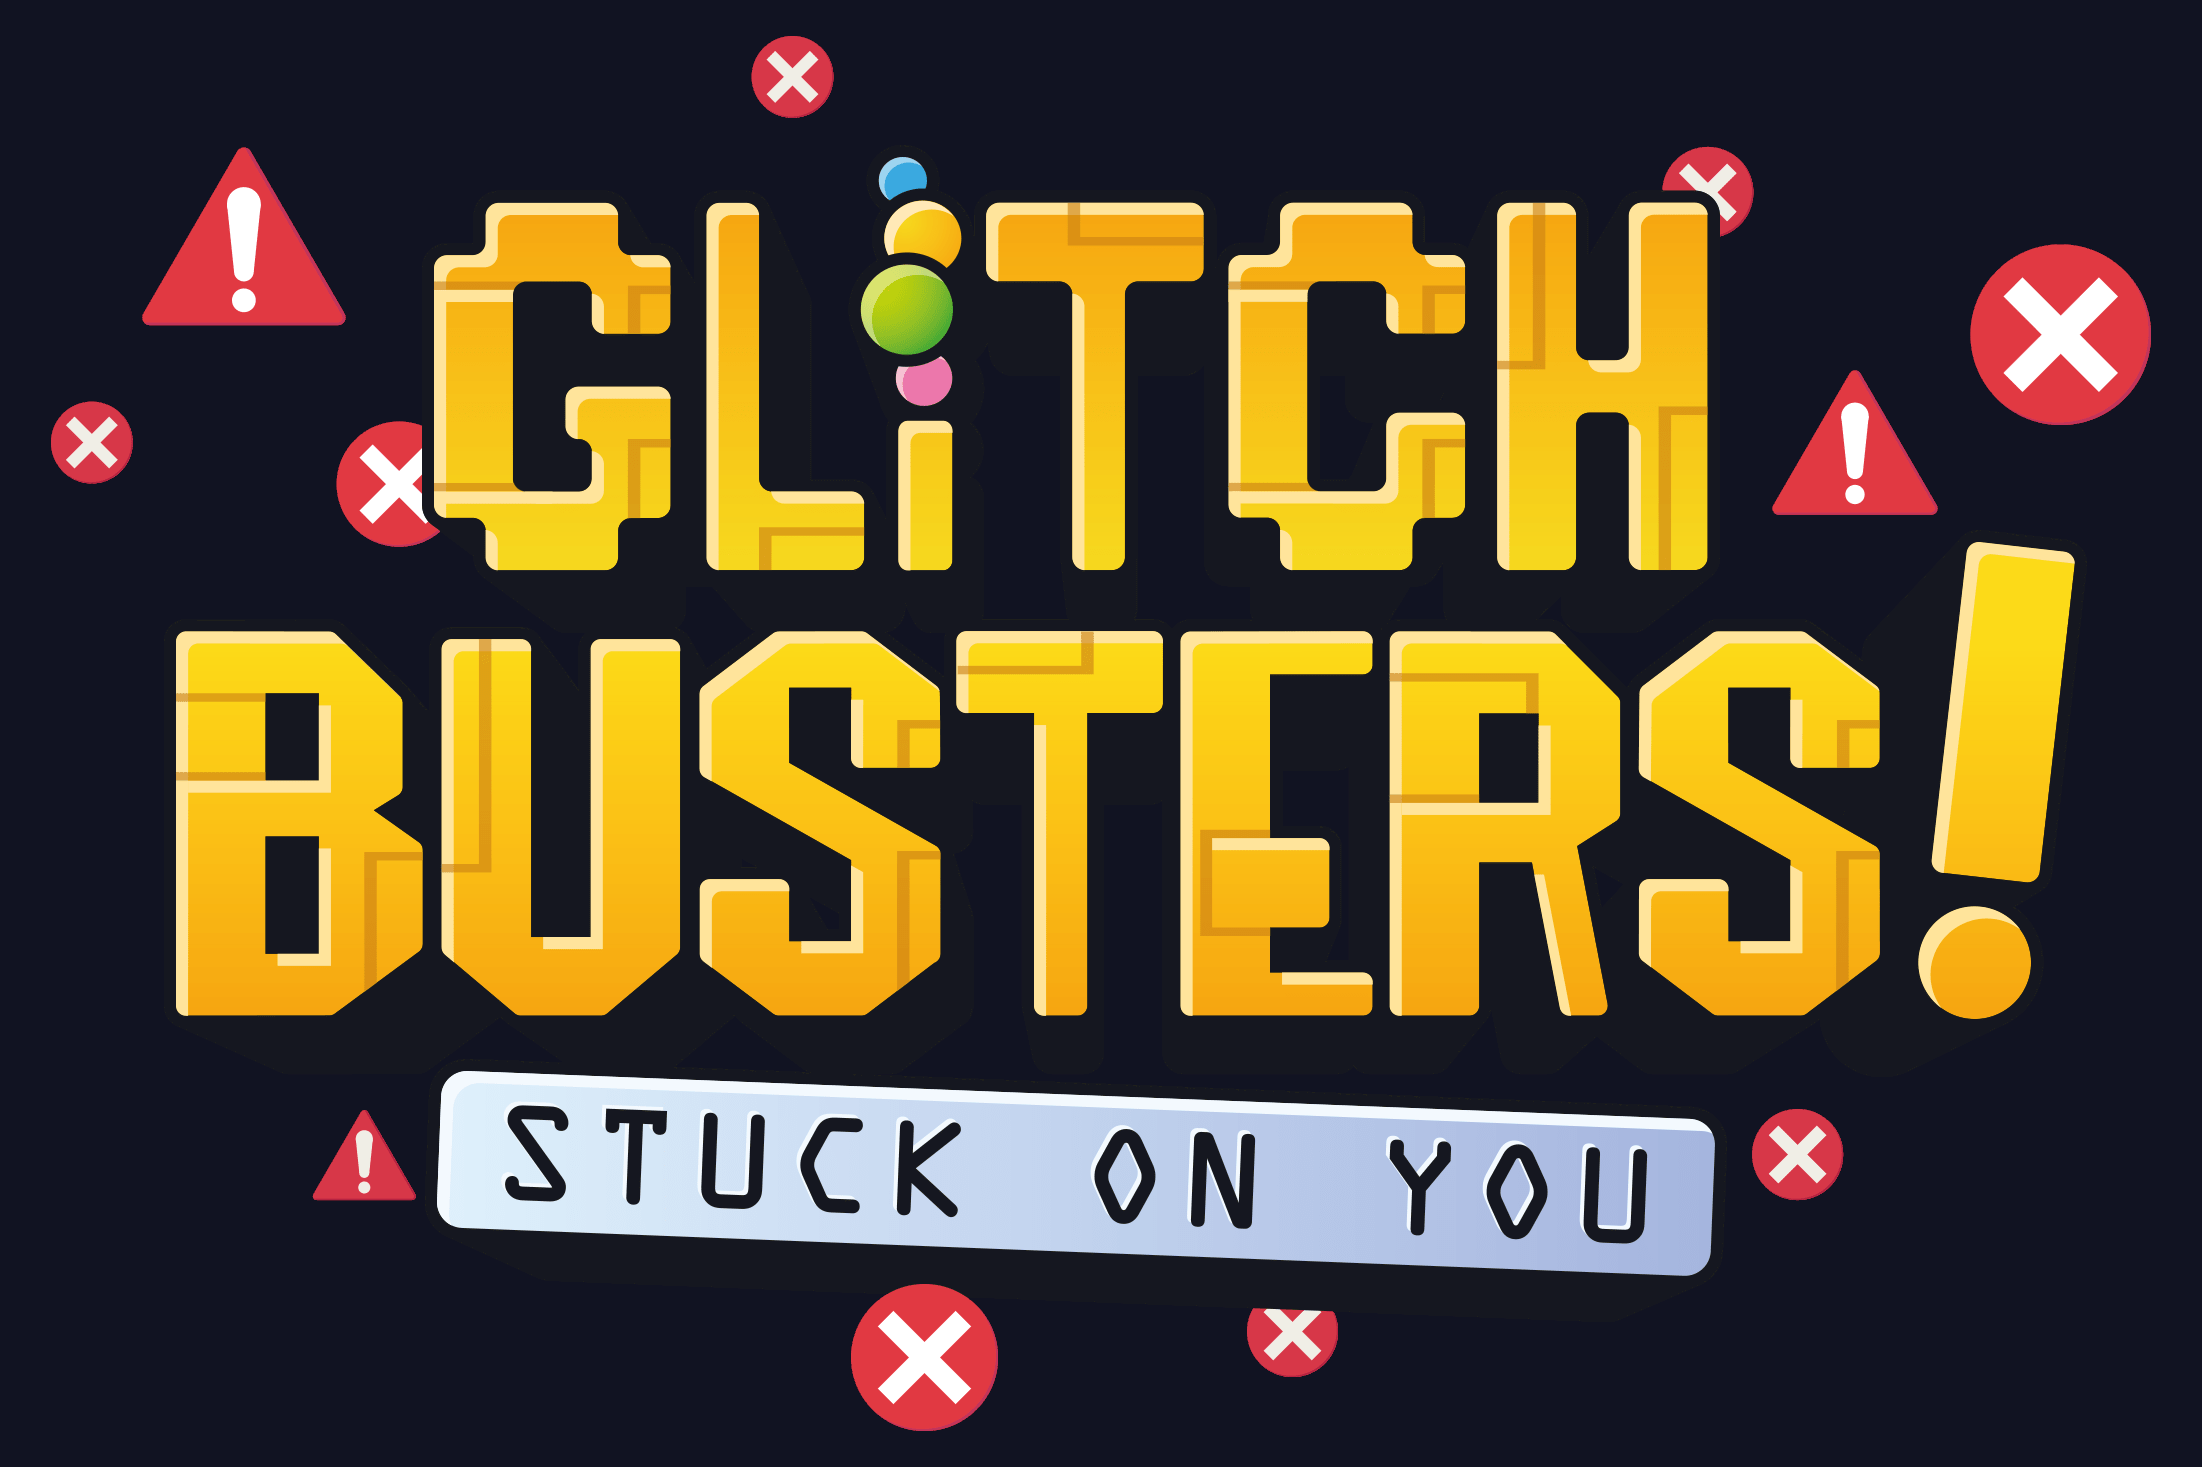 Video Game Glitch Busters: Stuck on You HD Wallpaper | Background Image